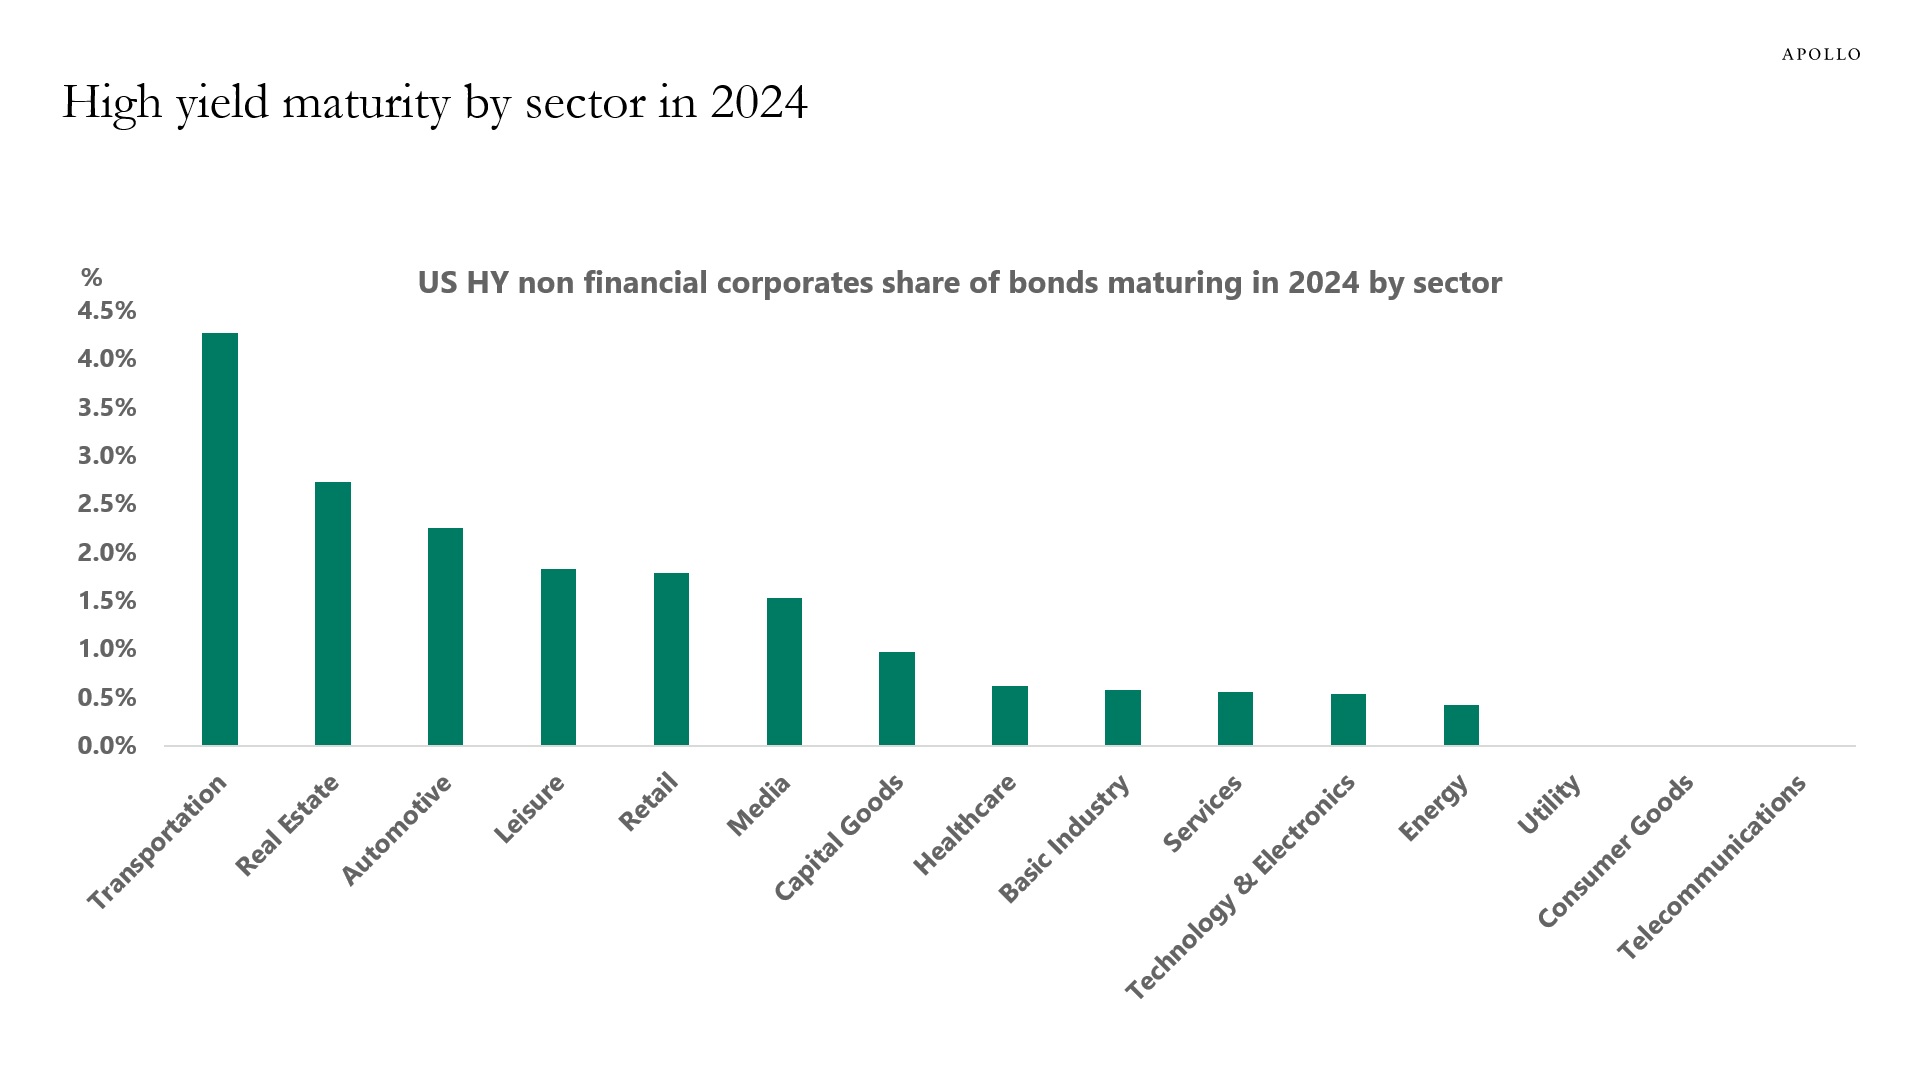 High yield bond maturities by sector in 2024